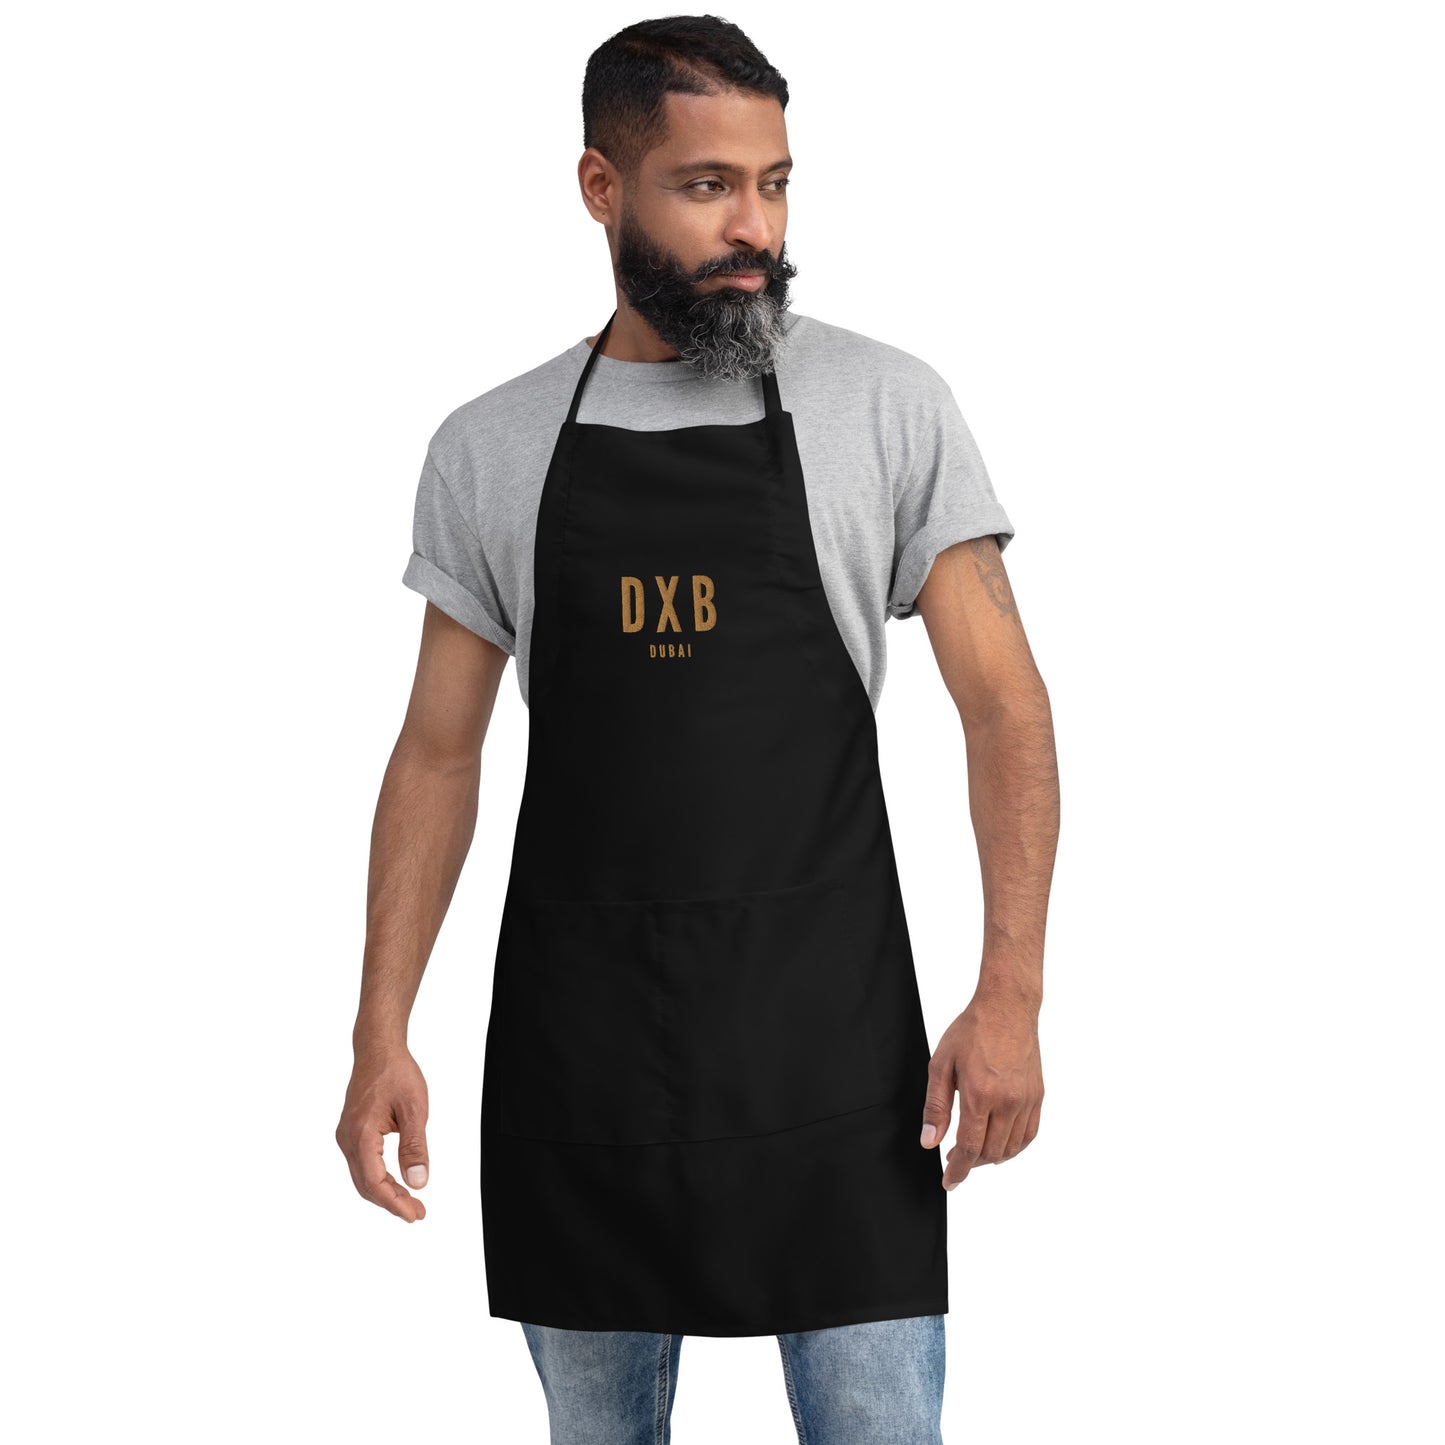 City Embroidered Apron - Old Gold • DXB Dubai • YHM Designs - Image 10